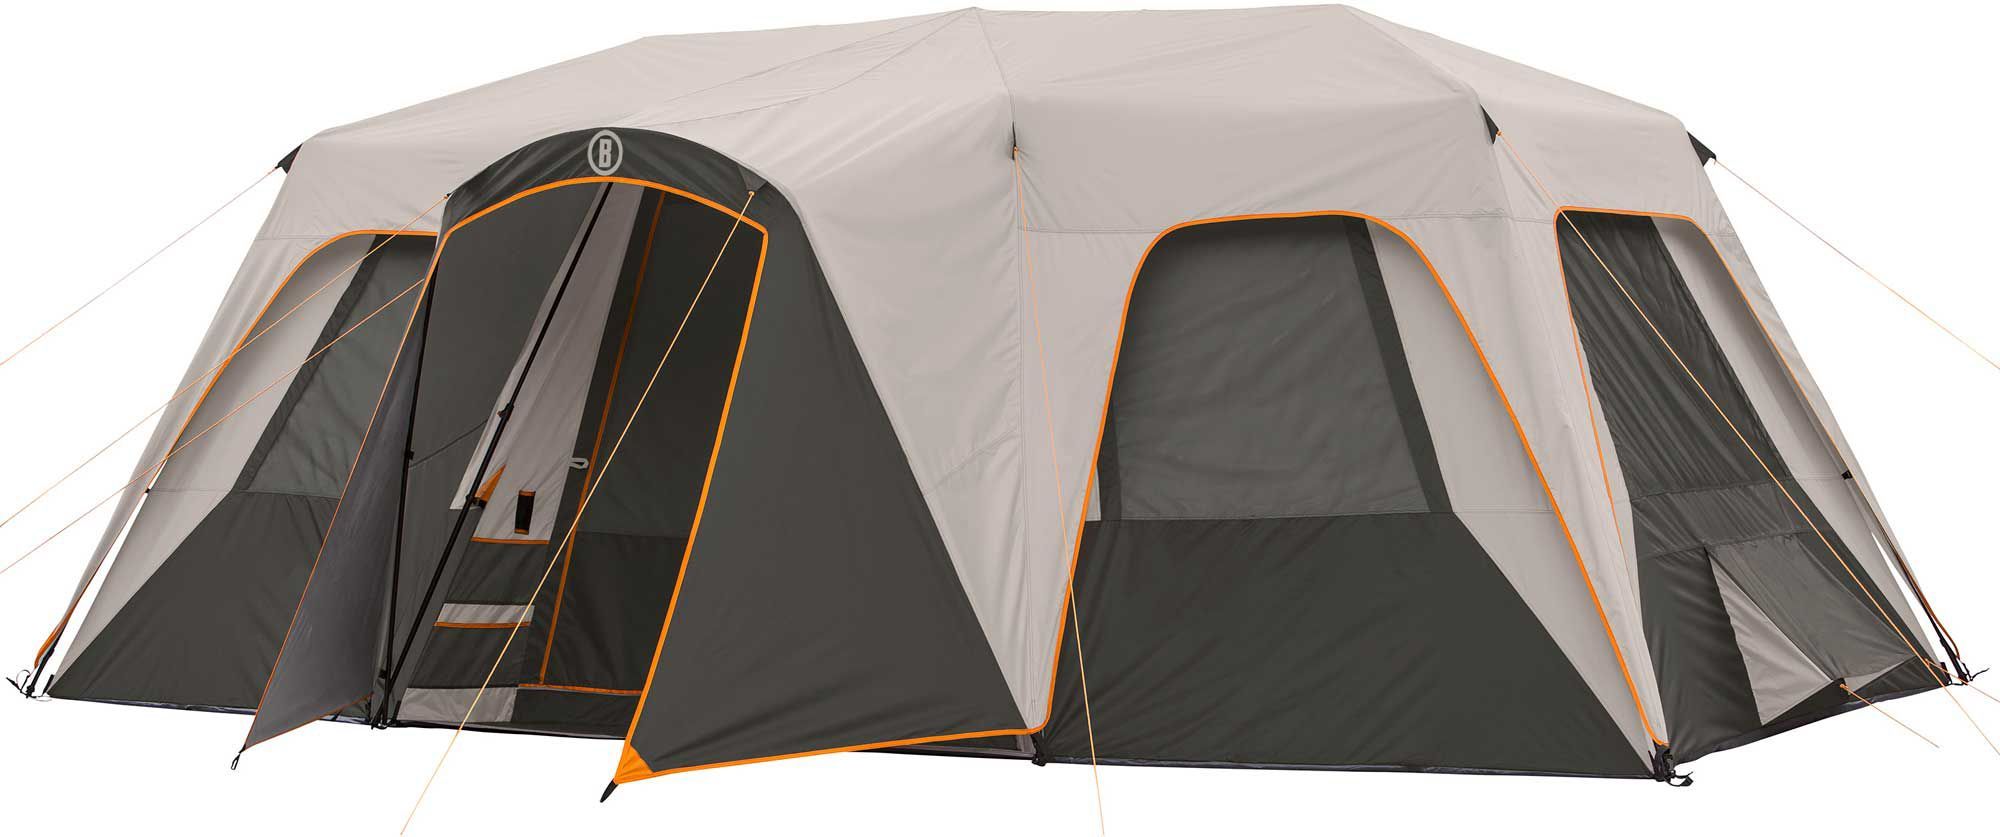 Bushnell 12-Person Instant Cabin Tent | Dick's Sporting Goods